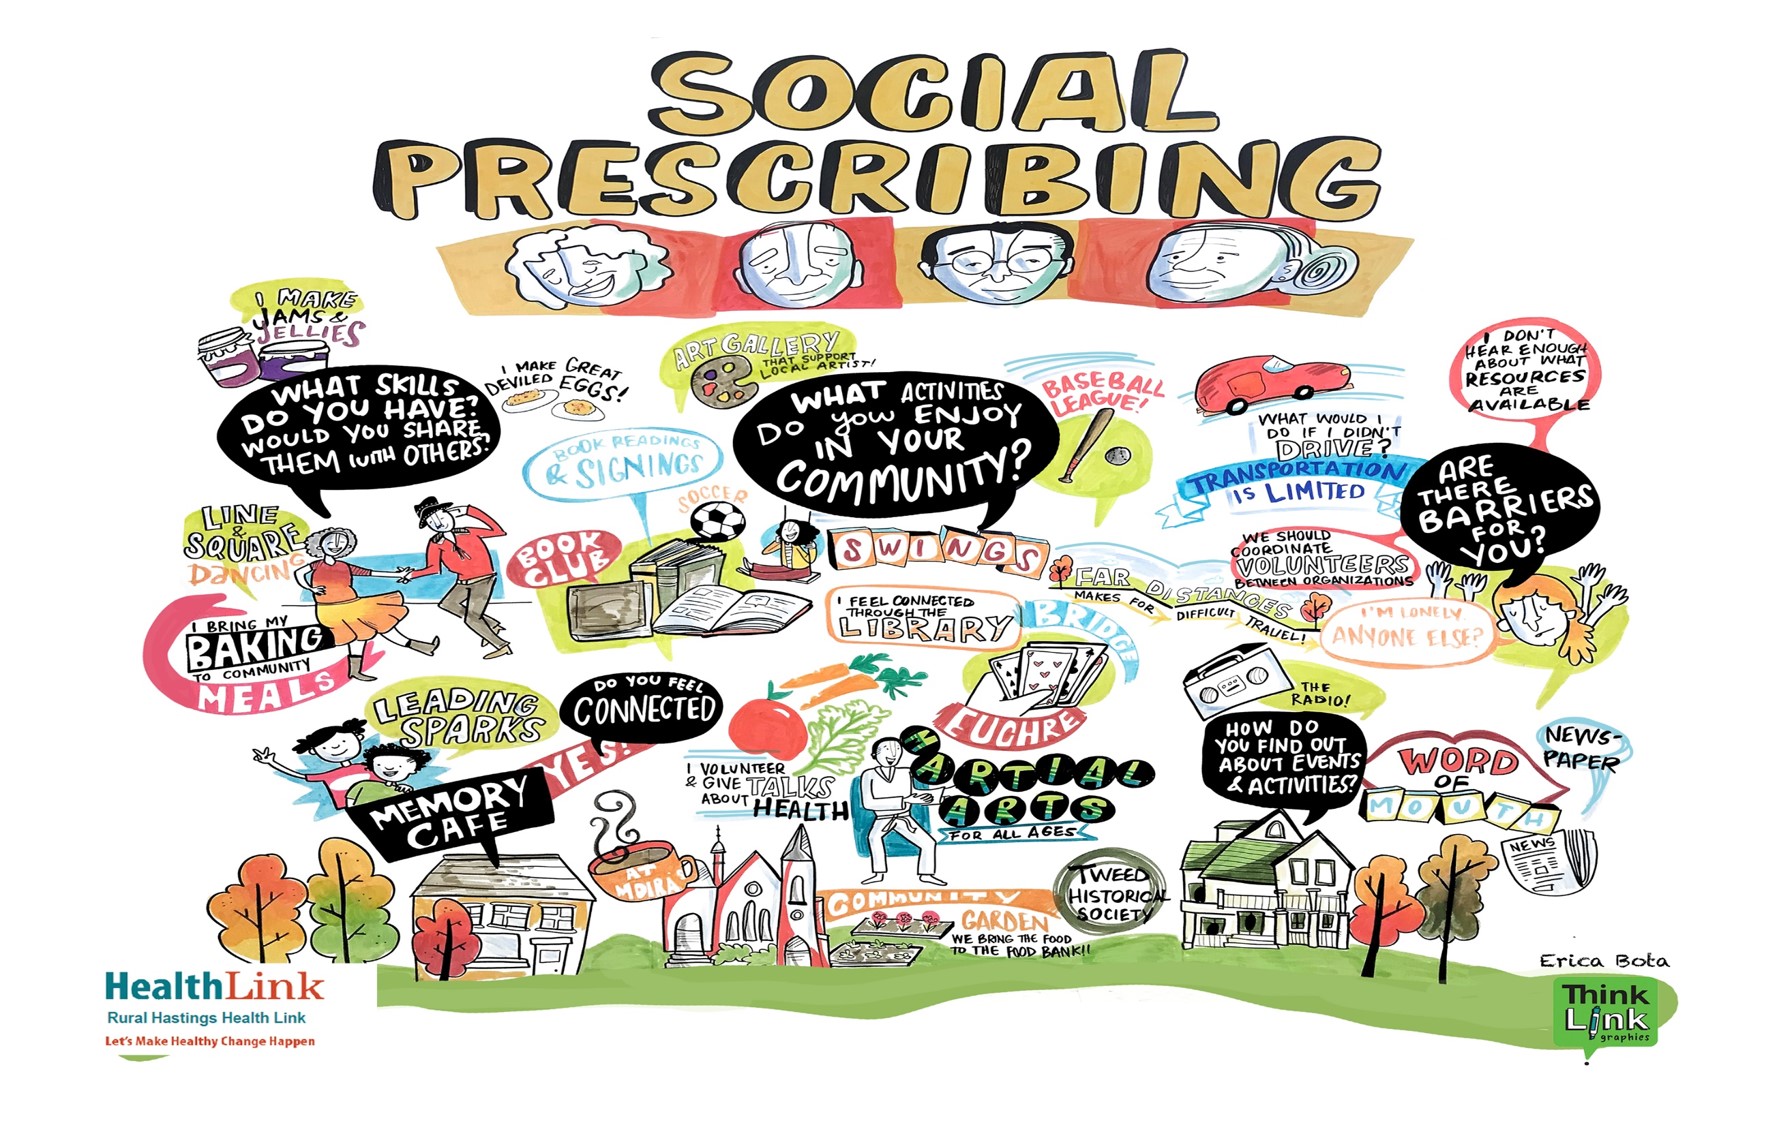 Social Prescribing - What skills do you have? Would you share them with others? What activities do you enjoy in your community? Are there barriers for you?